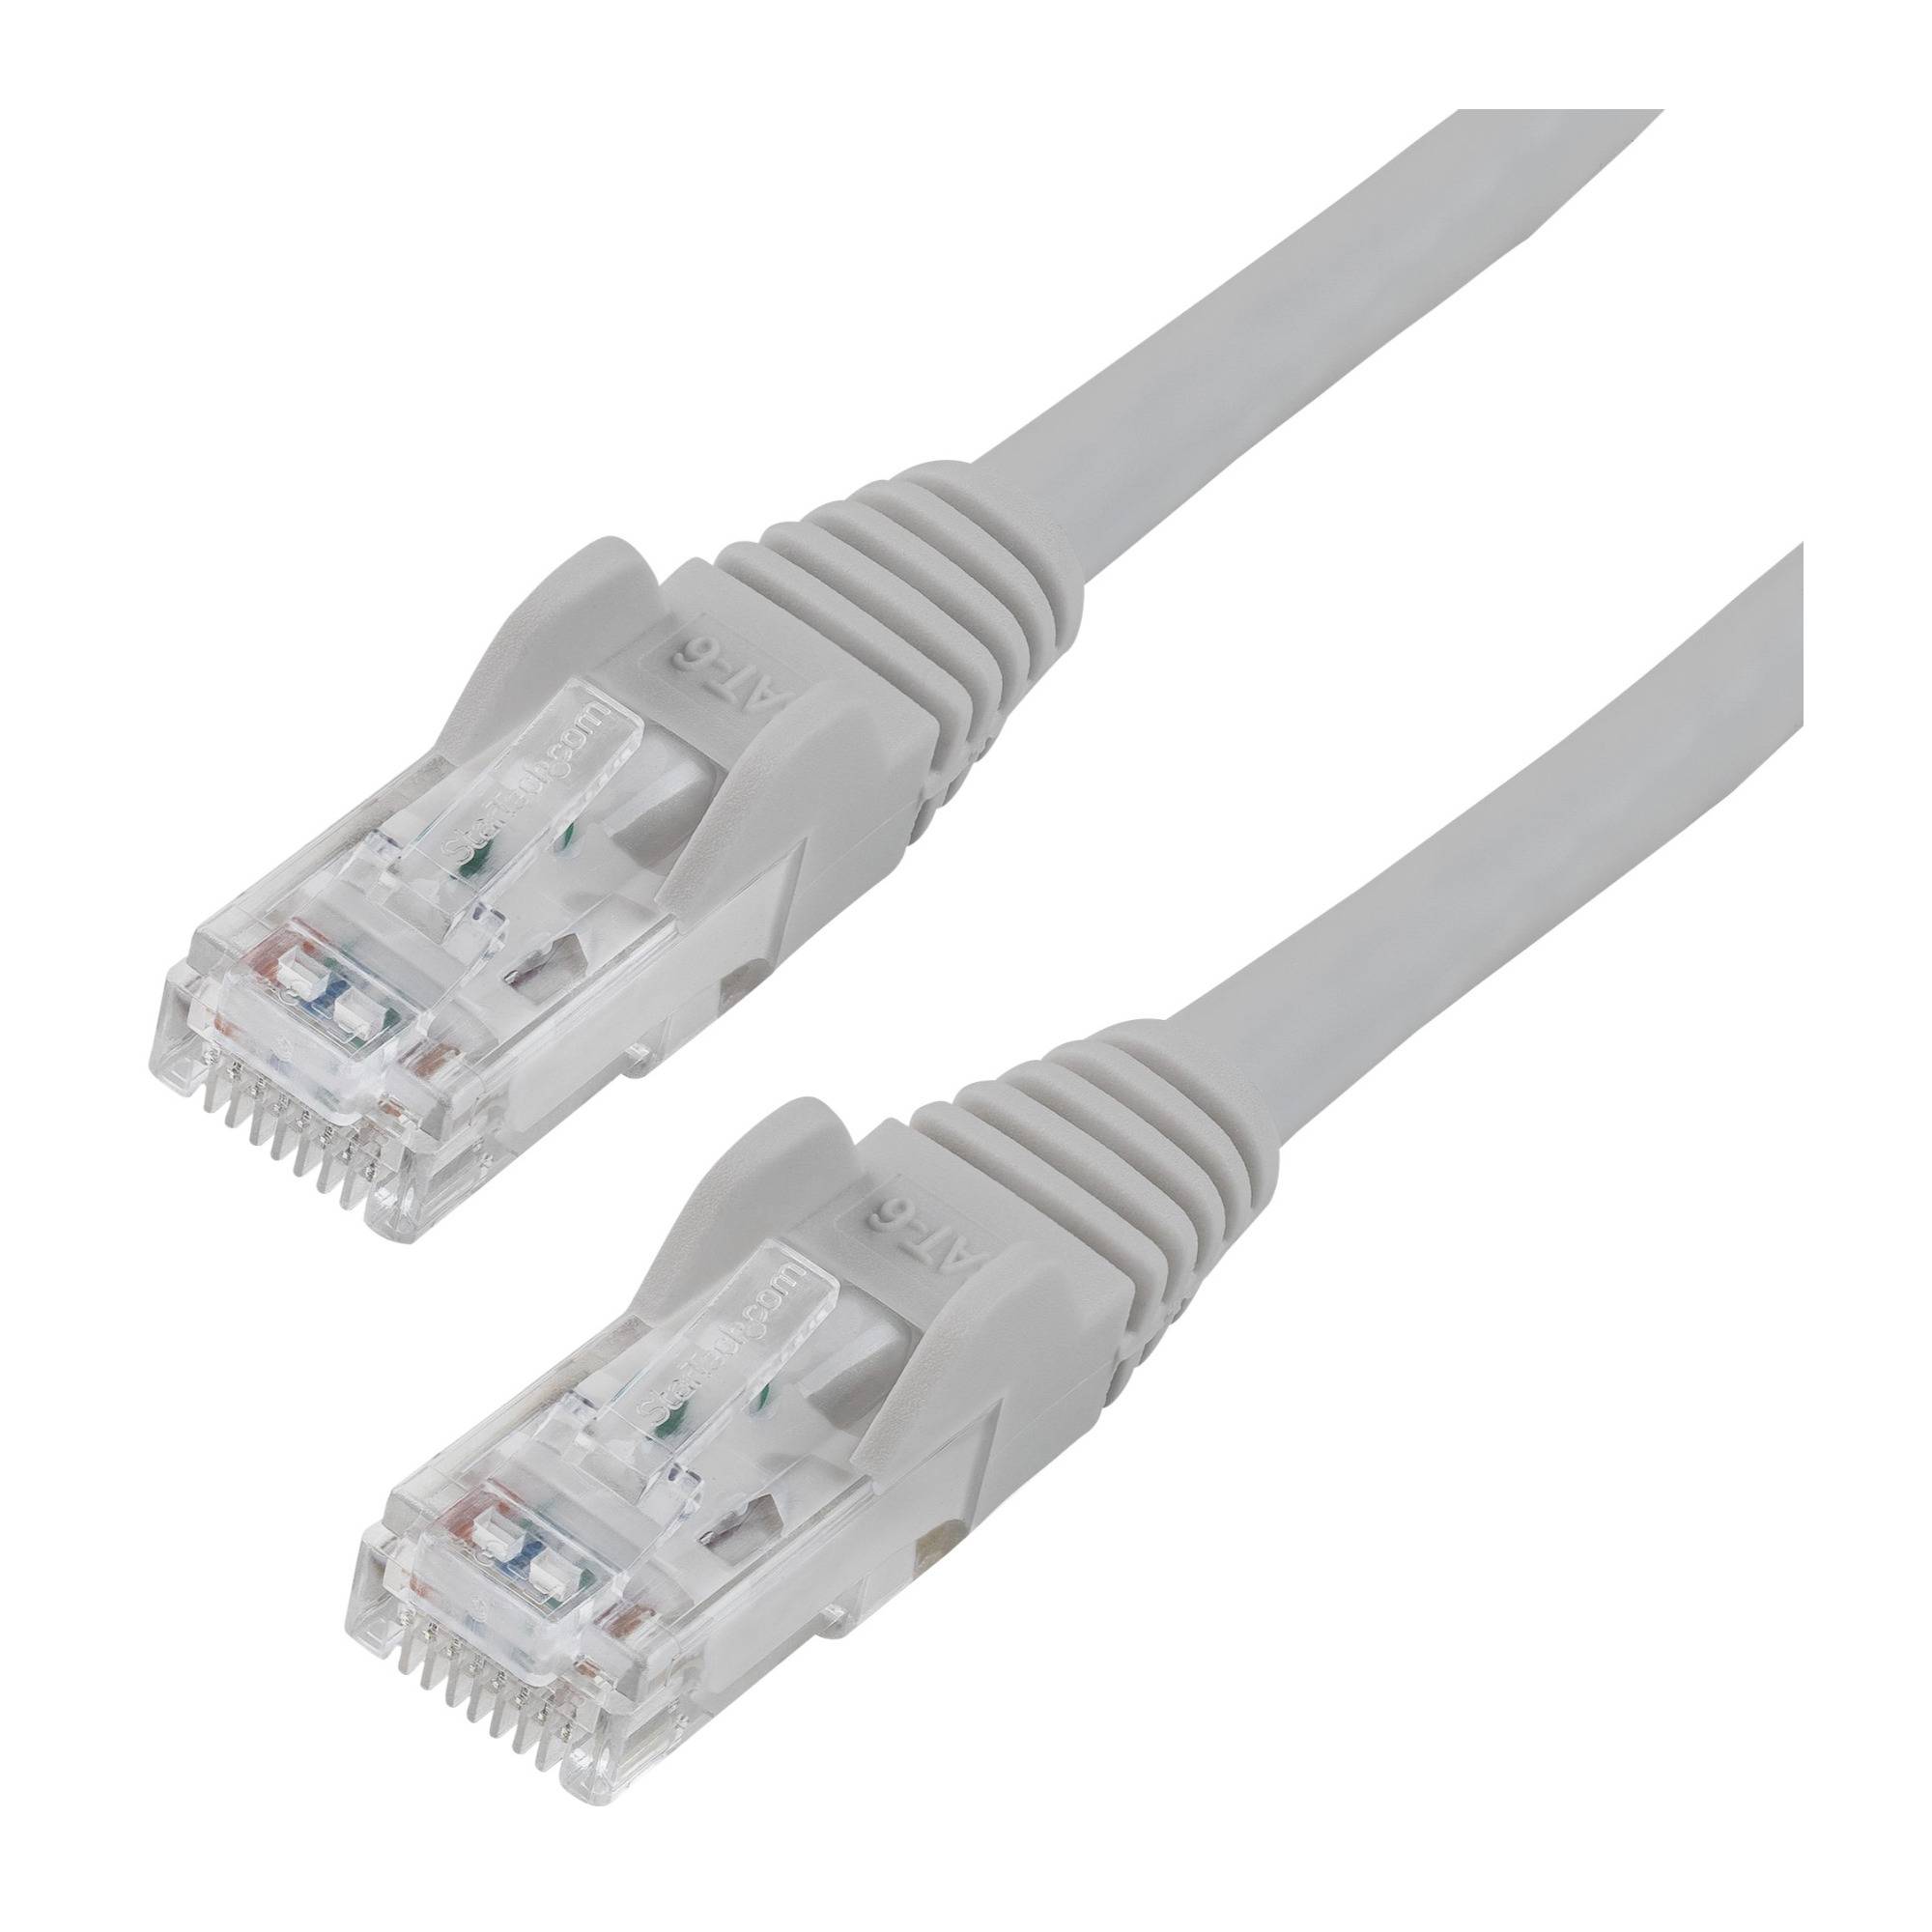 StarTech CAT6 UTP Patch Cable (100-Feet, Gray)